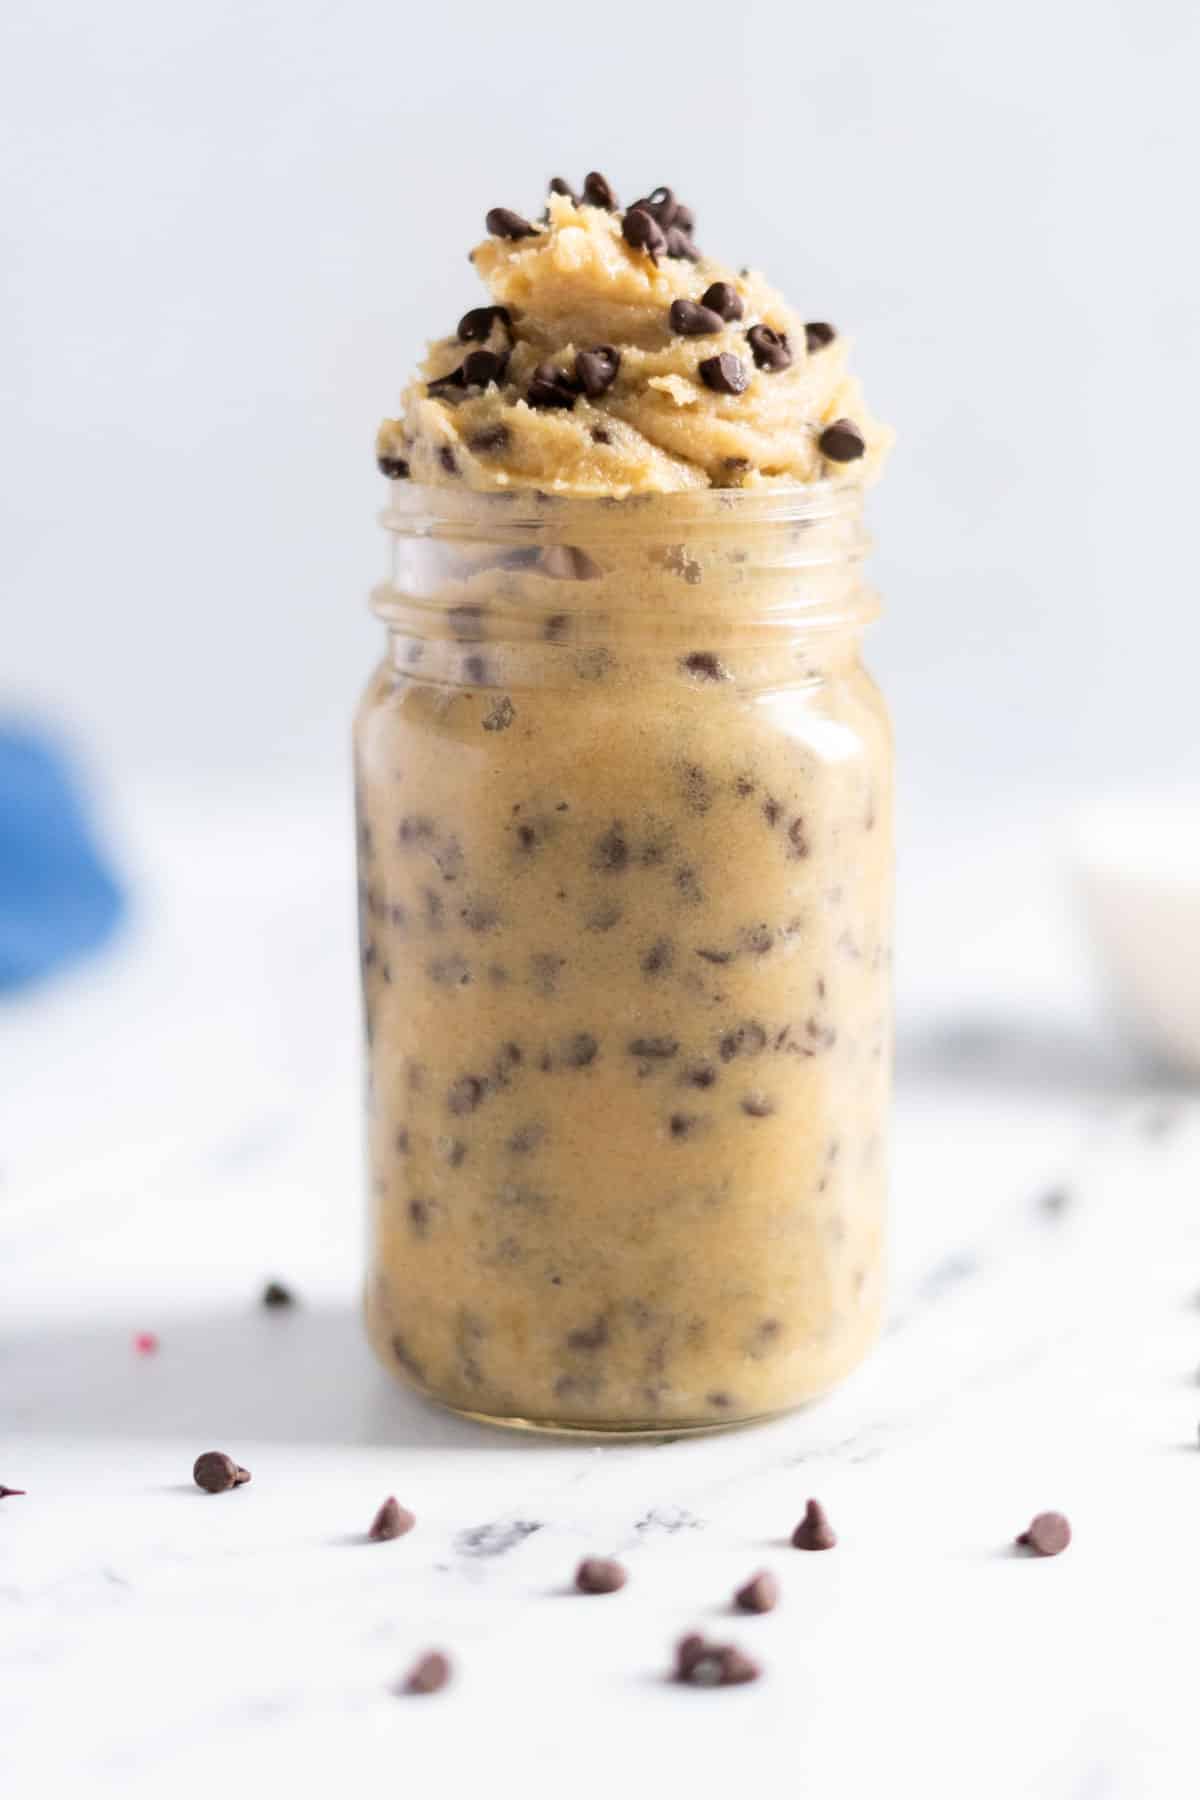 Chocolate chip cookie dough in a jar.